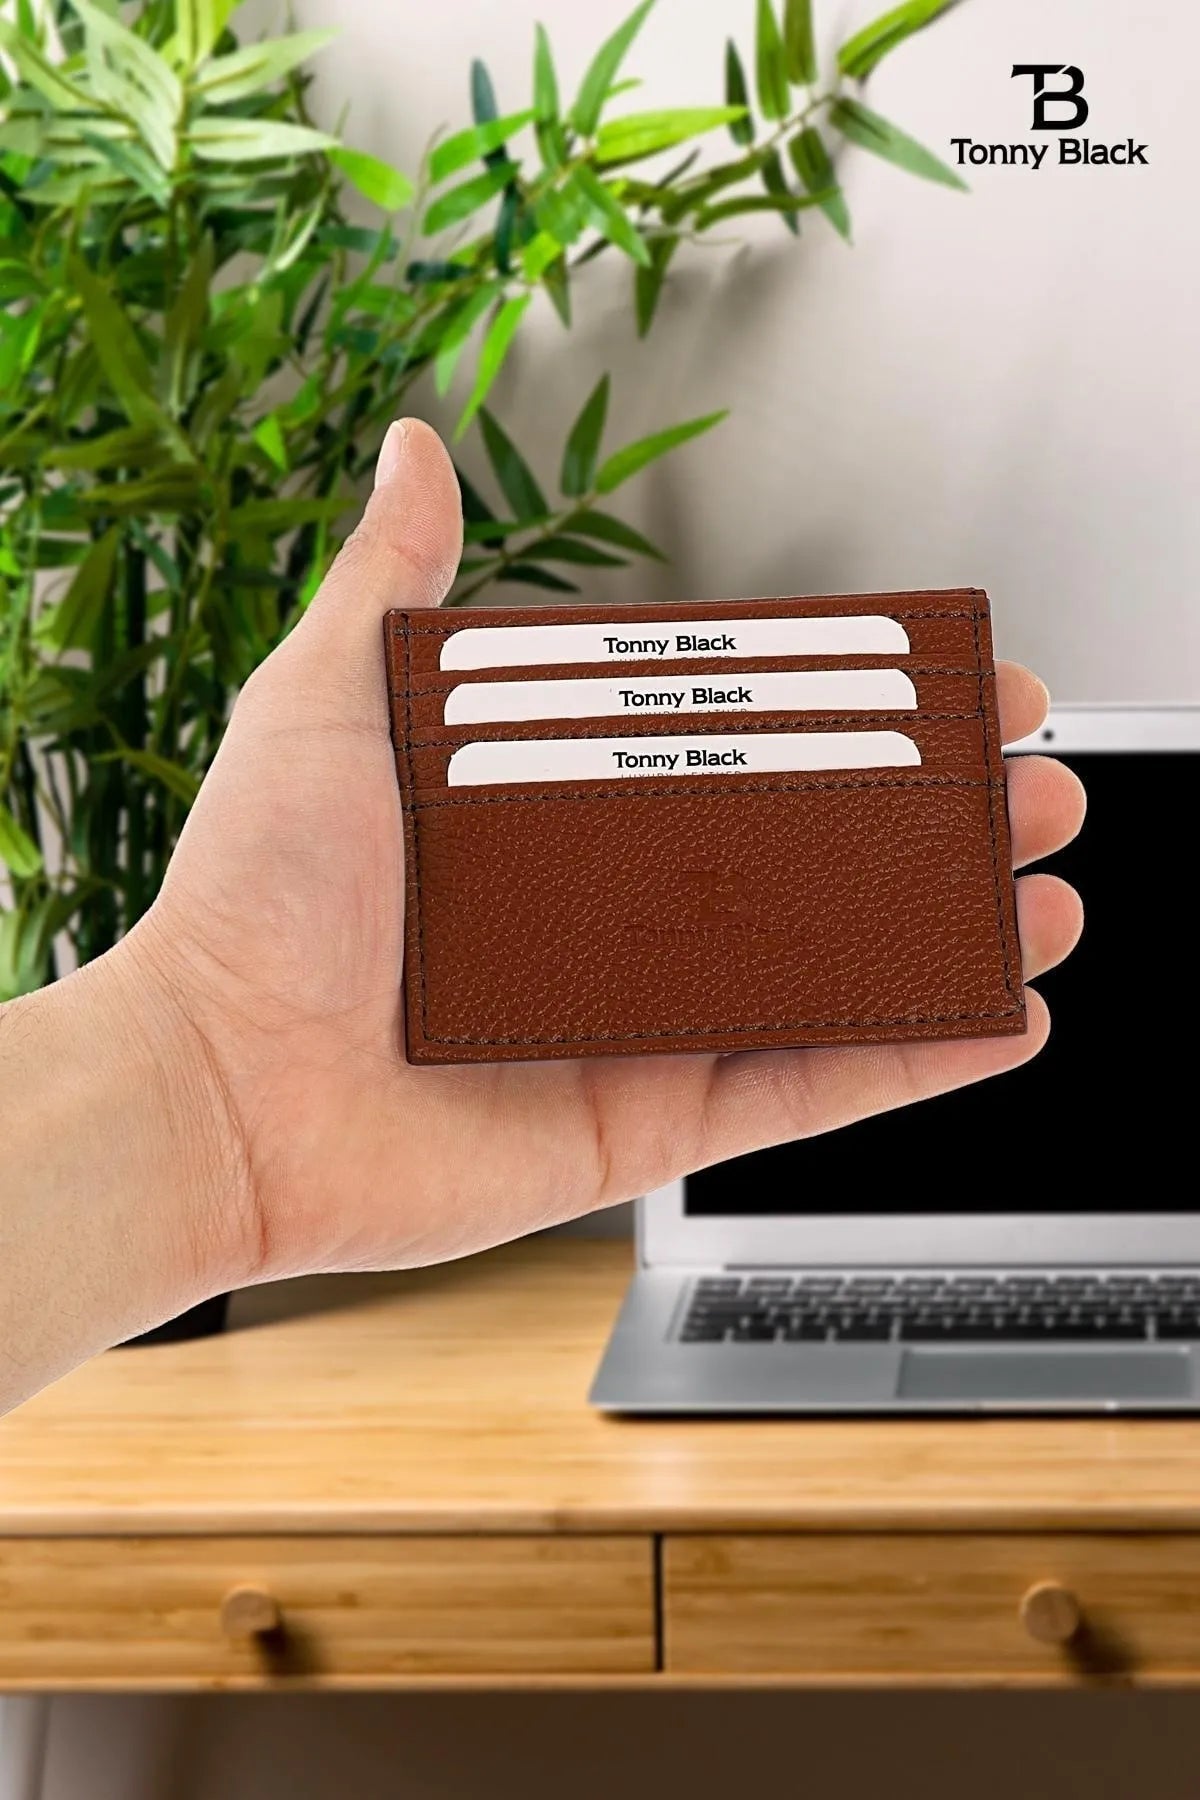 Original Boxed Unisex Super Slim Leather Thin Model Credit Card & Business Card Holder in Brown